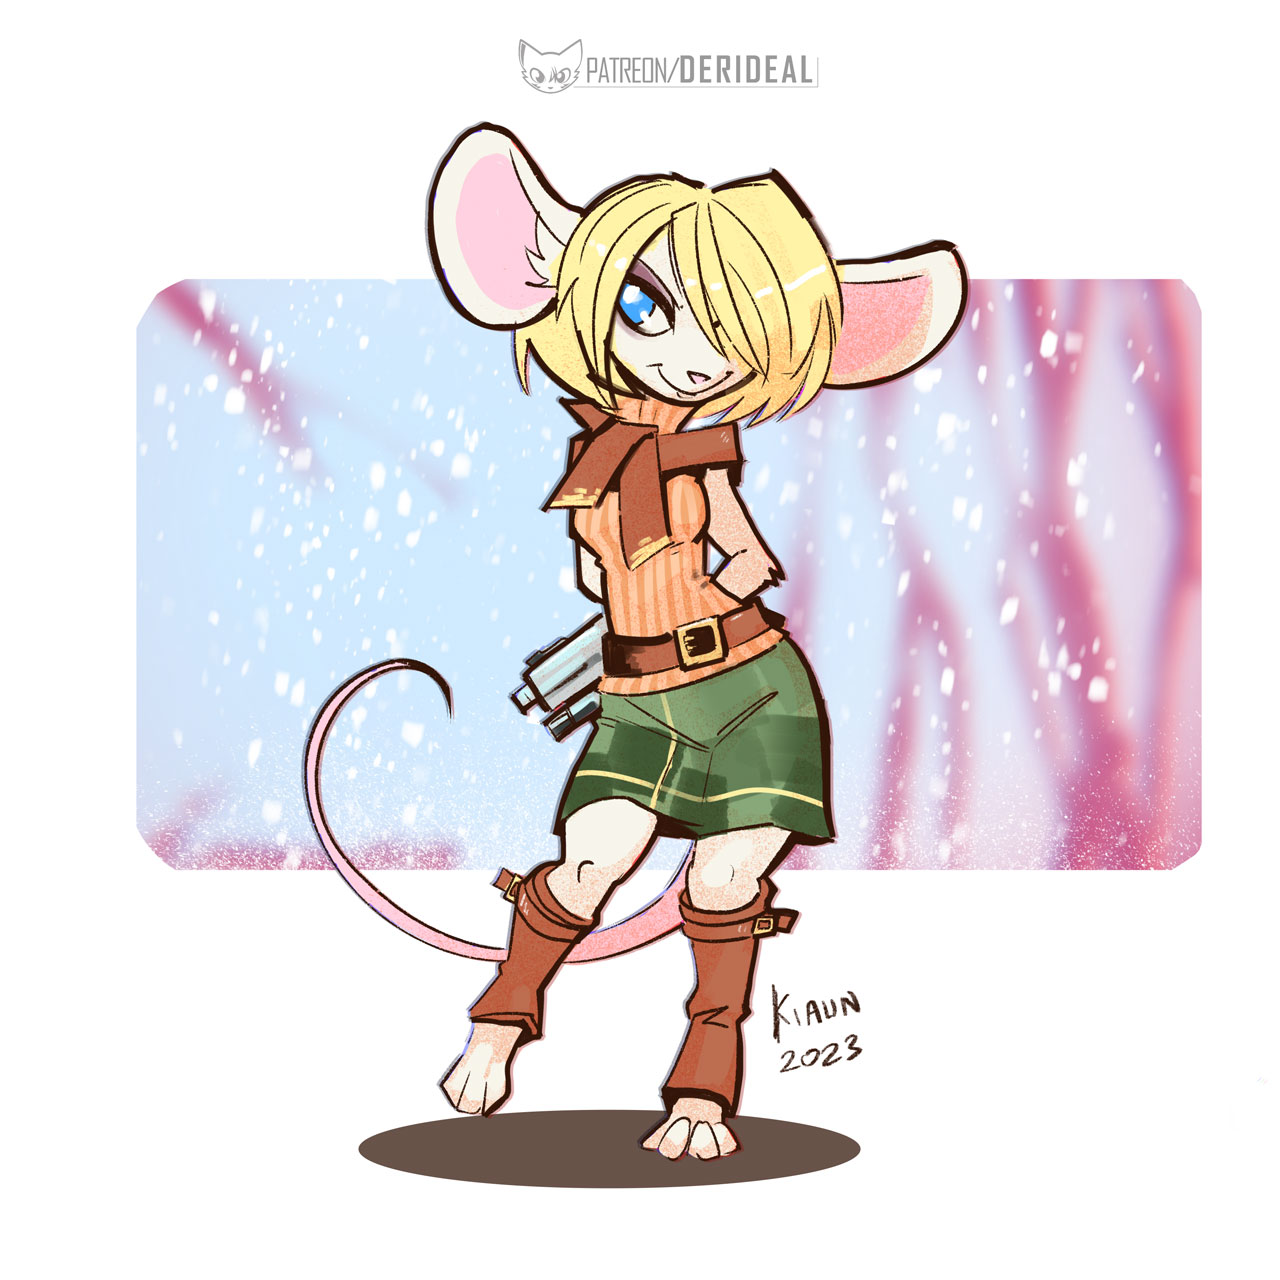 Mousley Ashley from resident evil 4 is mouse to meet you., Ashley Graham  as A Mouse (Moushly / Moushley)